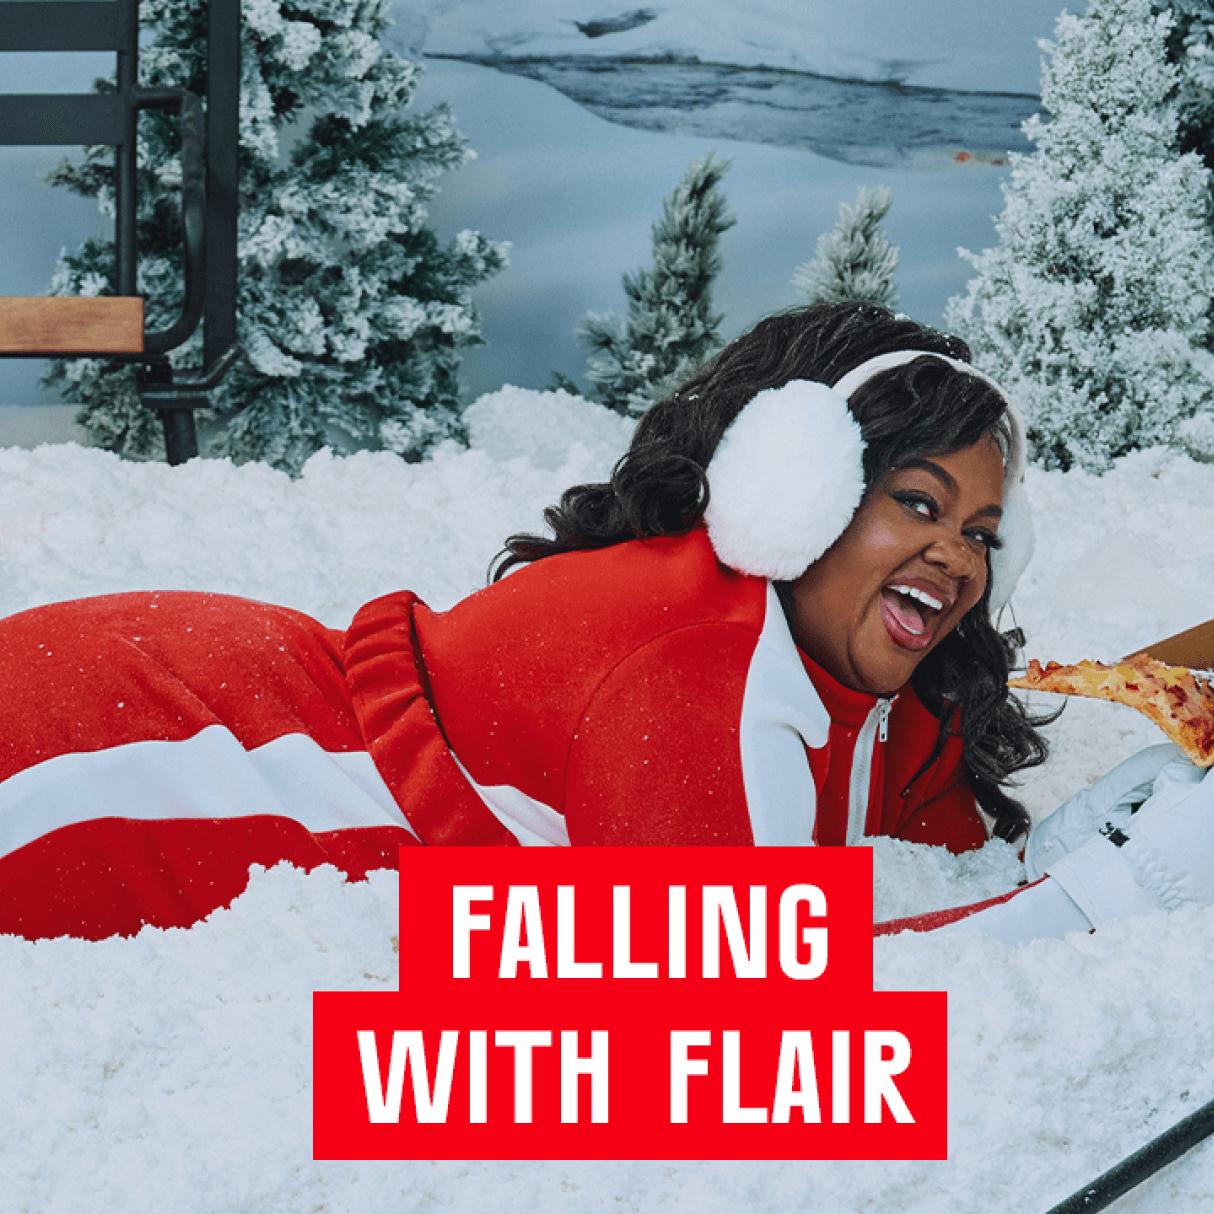 Falling with Flair video image